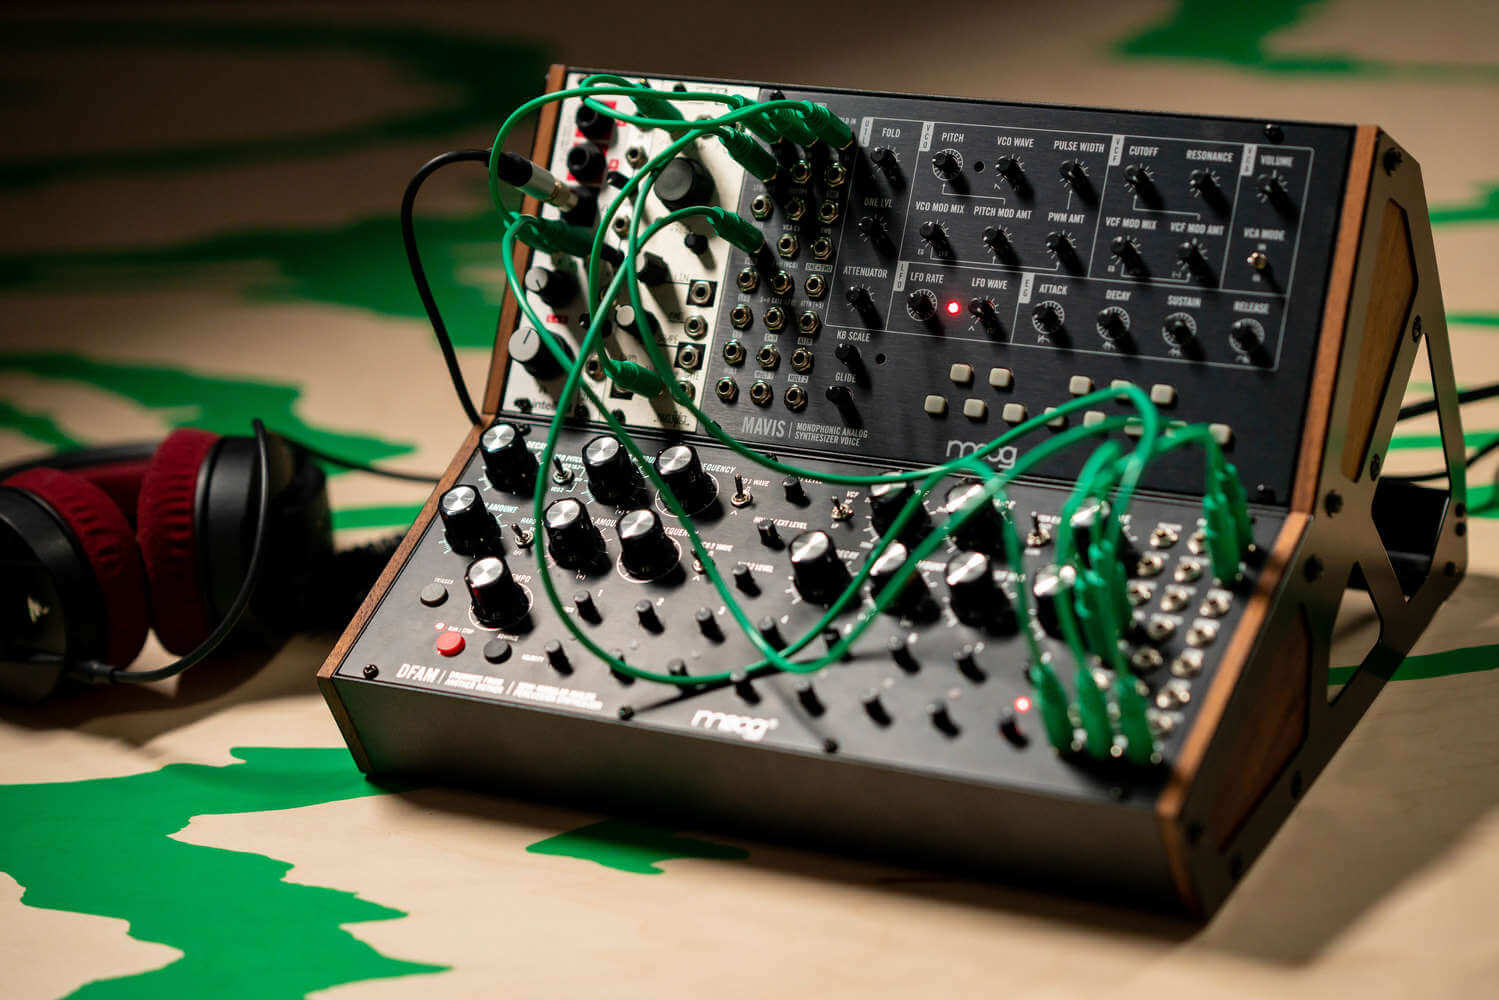 The Moog Mavis will fit in a Eurorack with its 44hp size. 